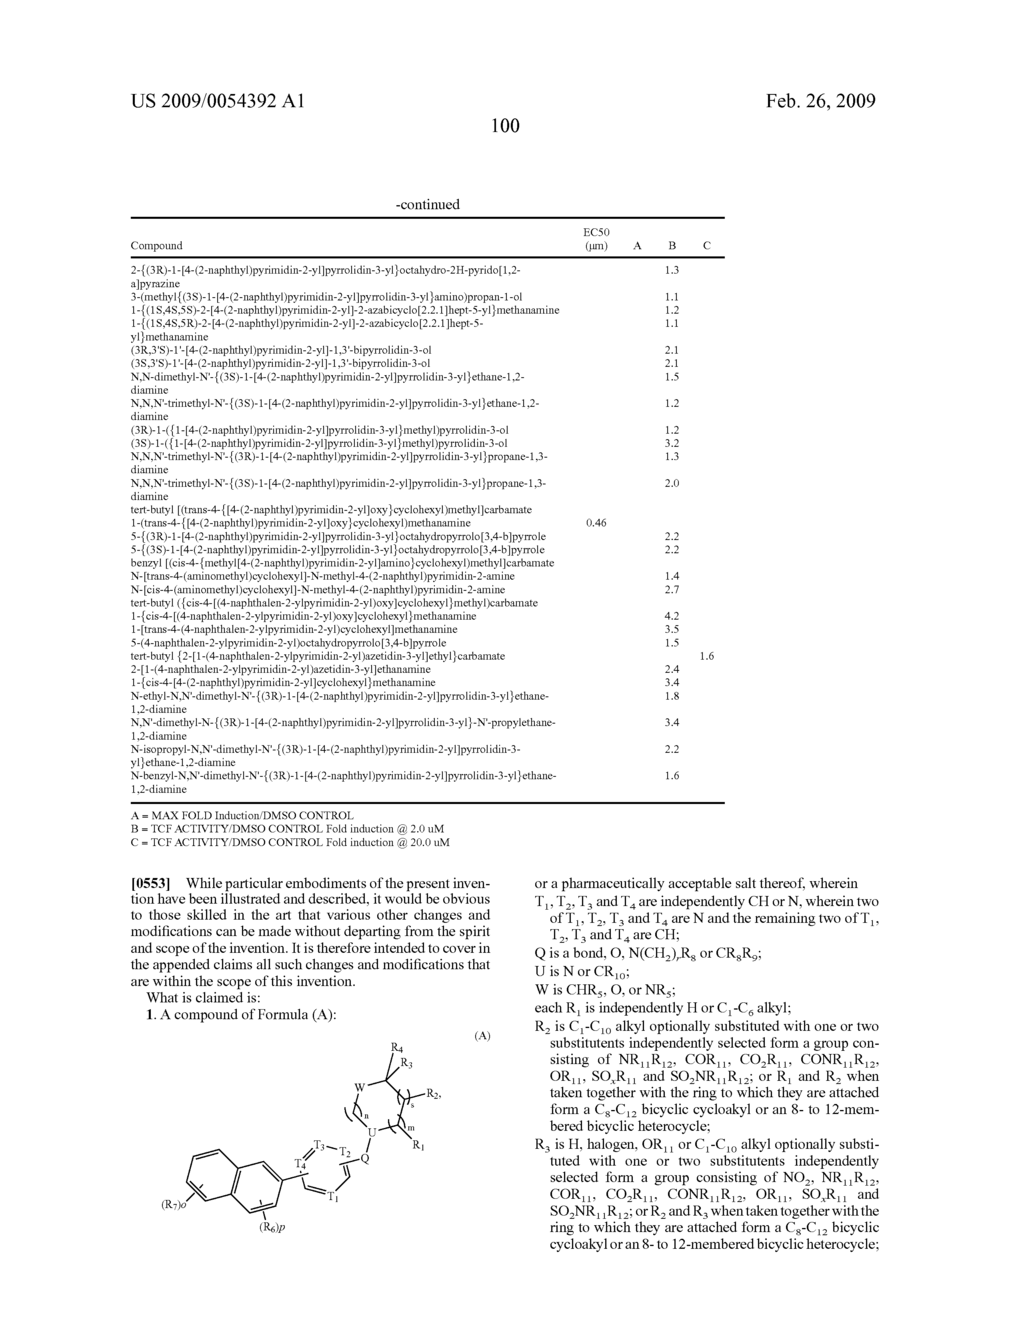 NAPHTHYLPYRIMIDINE, NAPHTHYLPYRAZINE AND NAPHTHYLPYRIDAZINE ANALOGS AND THEIR USE AS AGONISTS OF THE WNT-BETA-CATENIN CELLULAR MESSAGING SYSTEM - diagram, schematic, and image 101